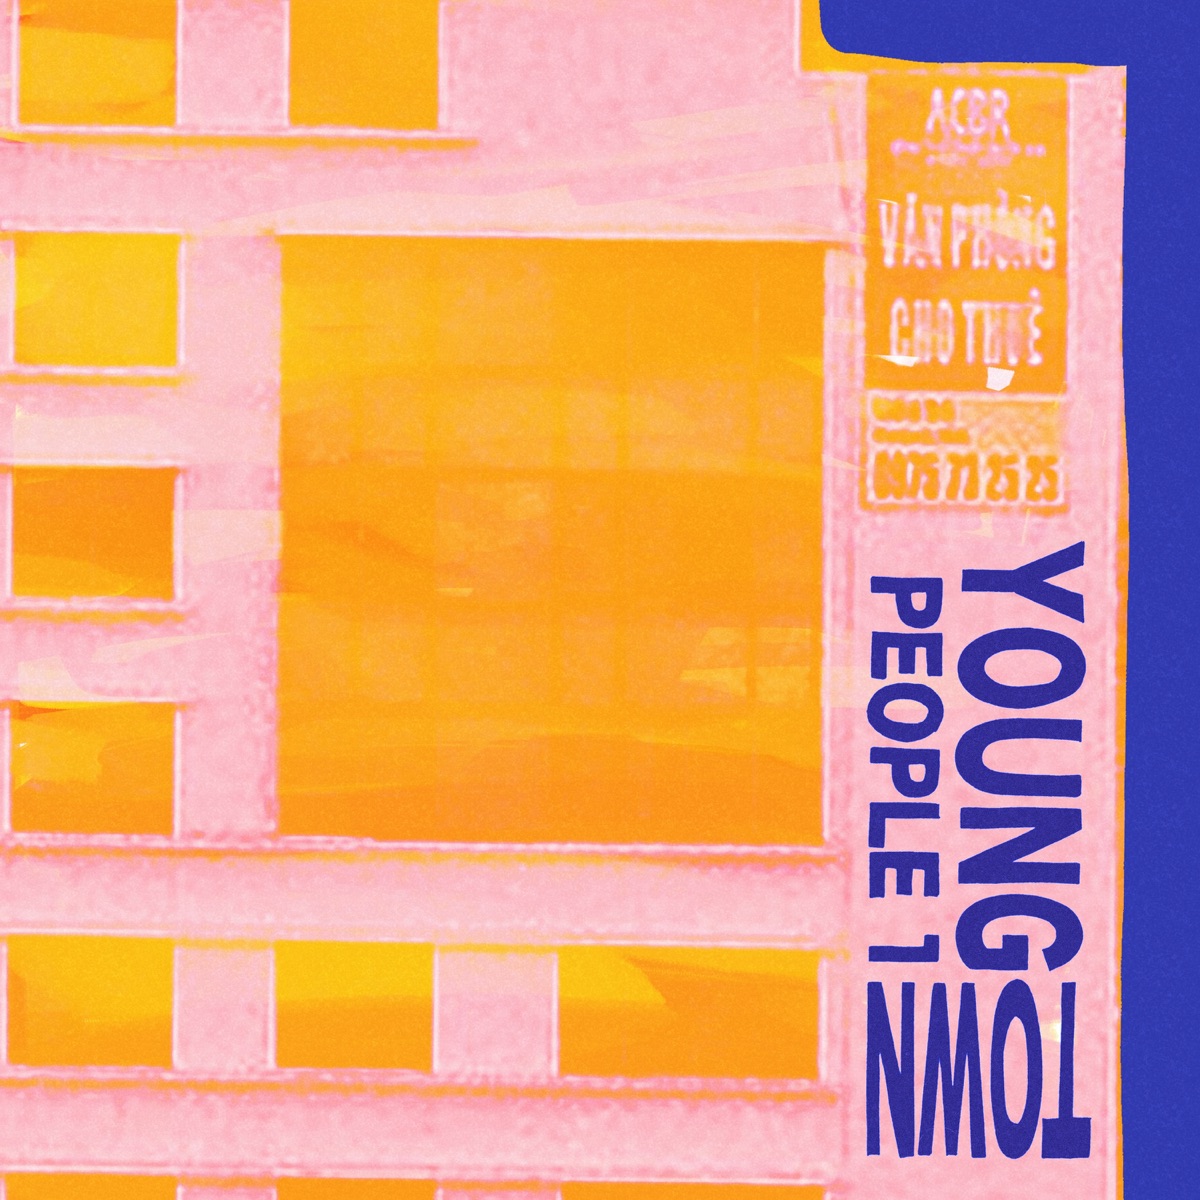 『PEOPLE 1 - YOUNG TOWN』収録の『YOUNG TOWN』ジャケット